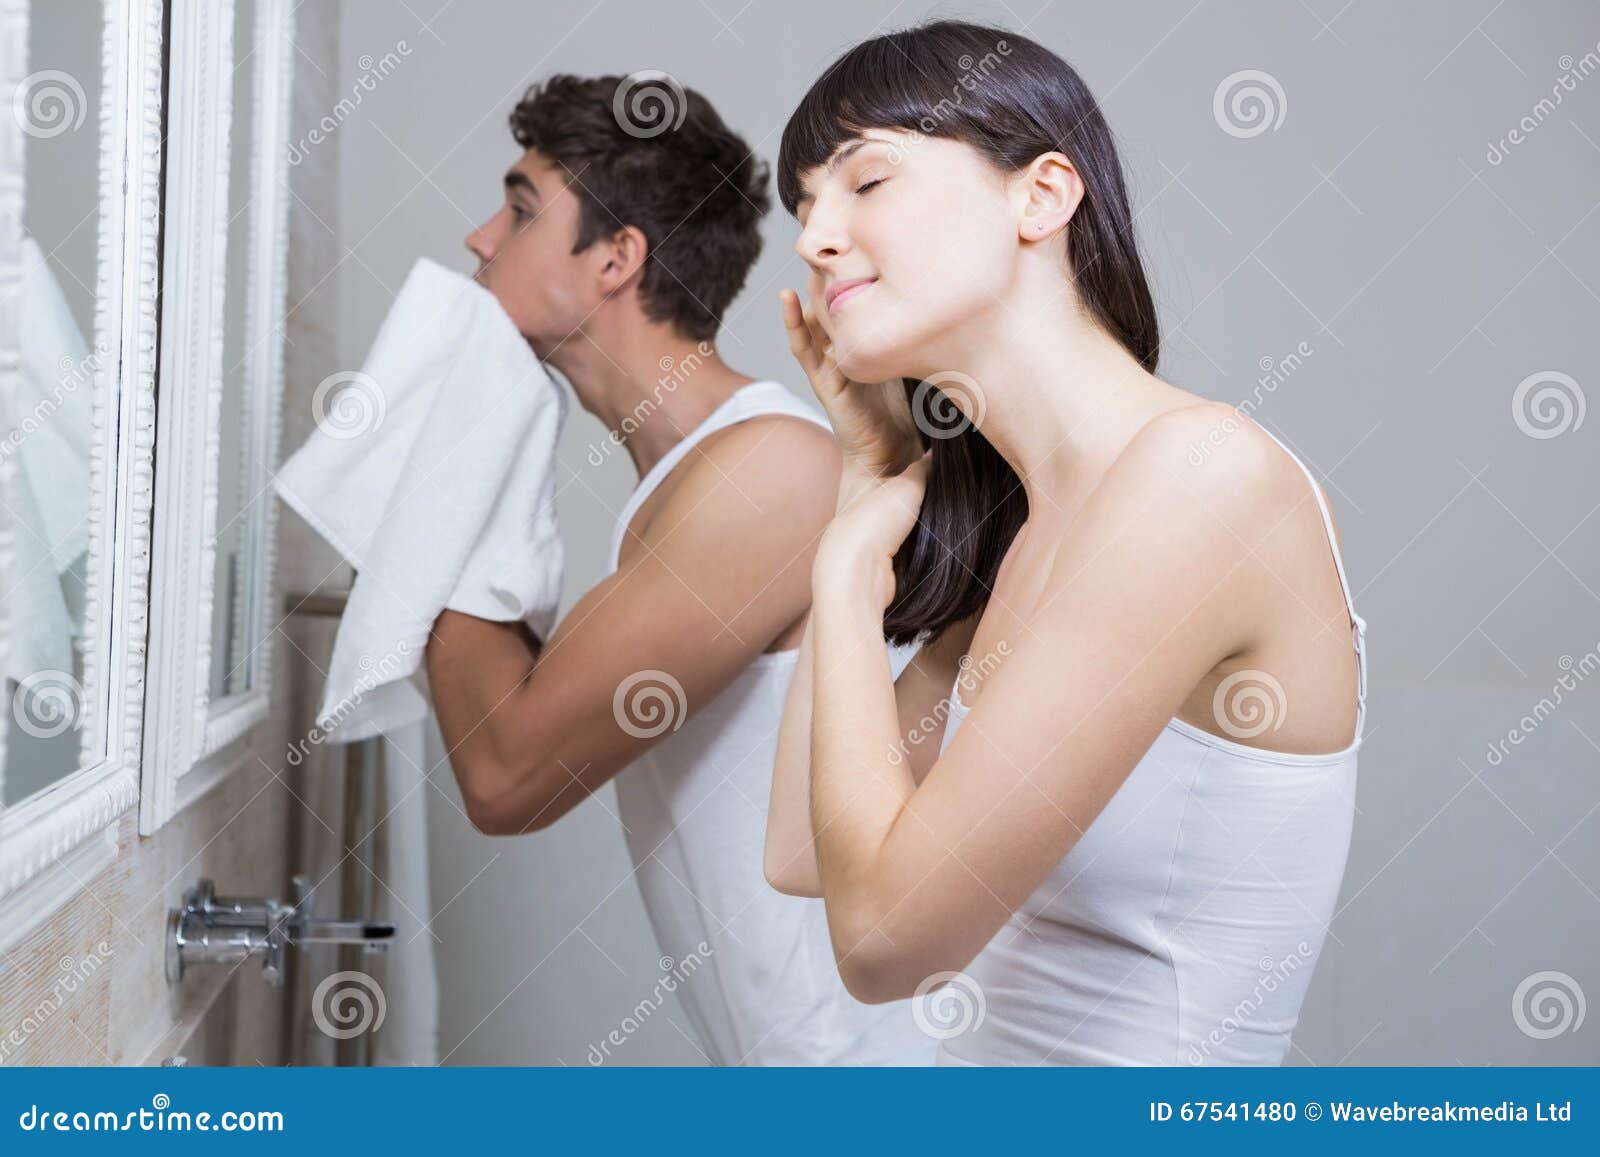 Bathroom Routine For Young Couple Stock Photo Image Of Cleaning